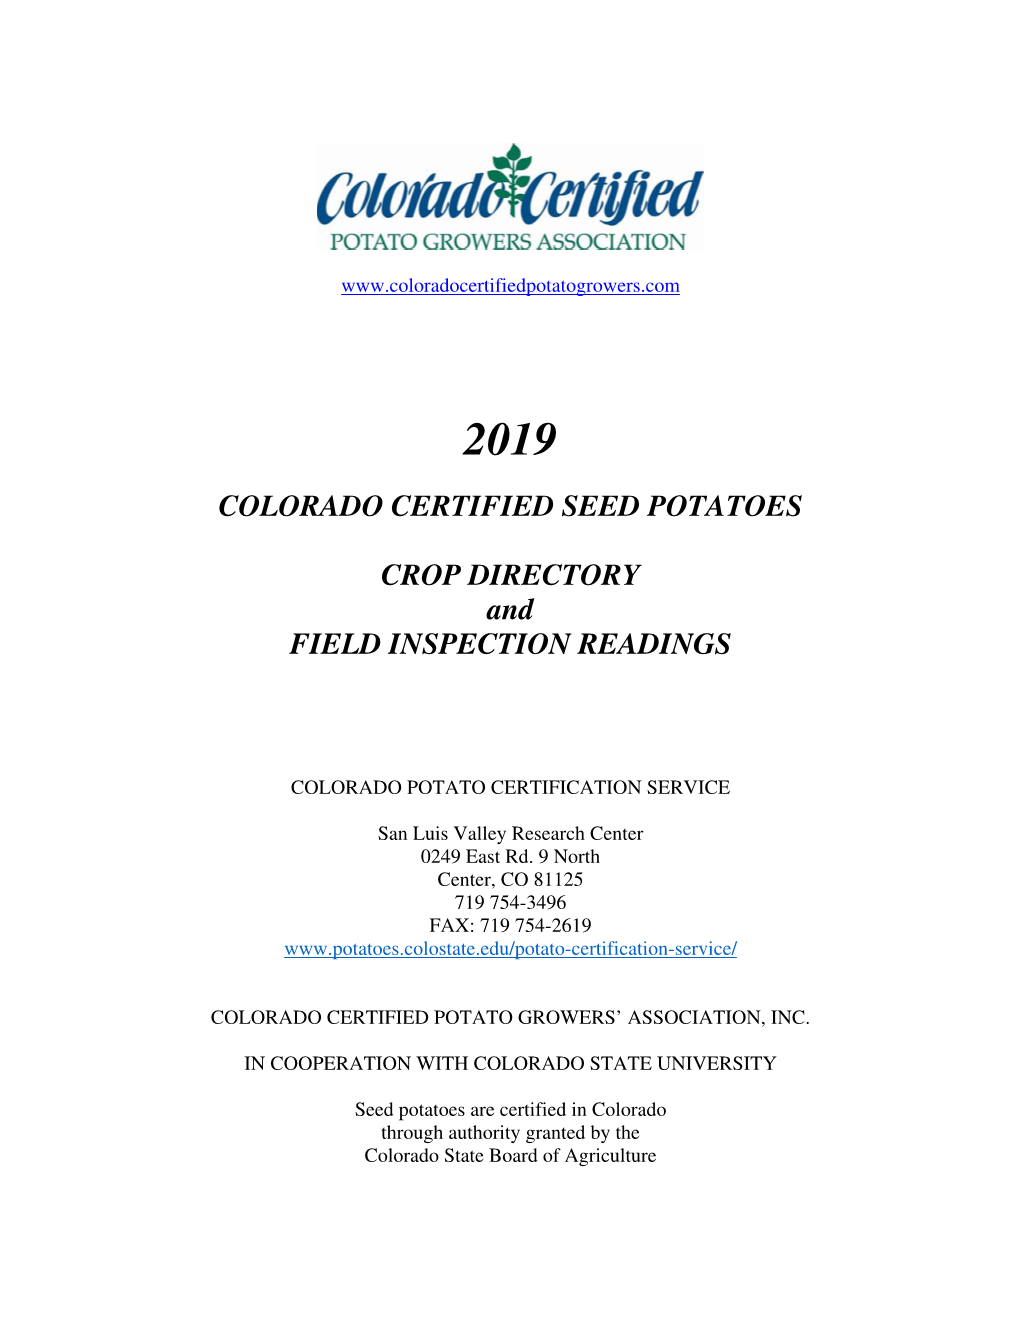 COLORADO CERTIFIED SEED POTATOES CROP DIRECTORY and FIELD INSPECTION READINGS